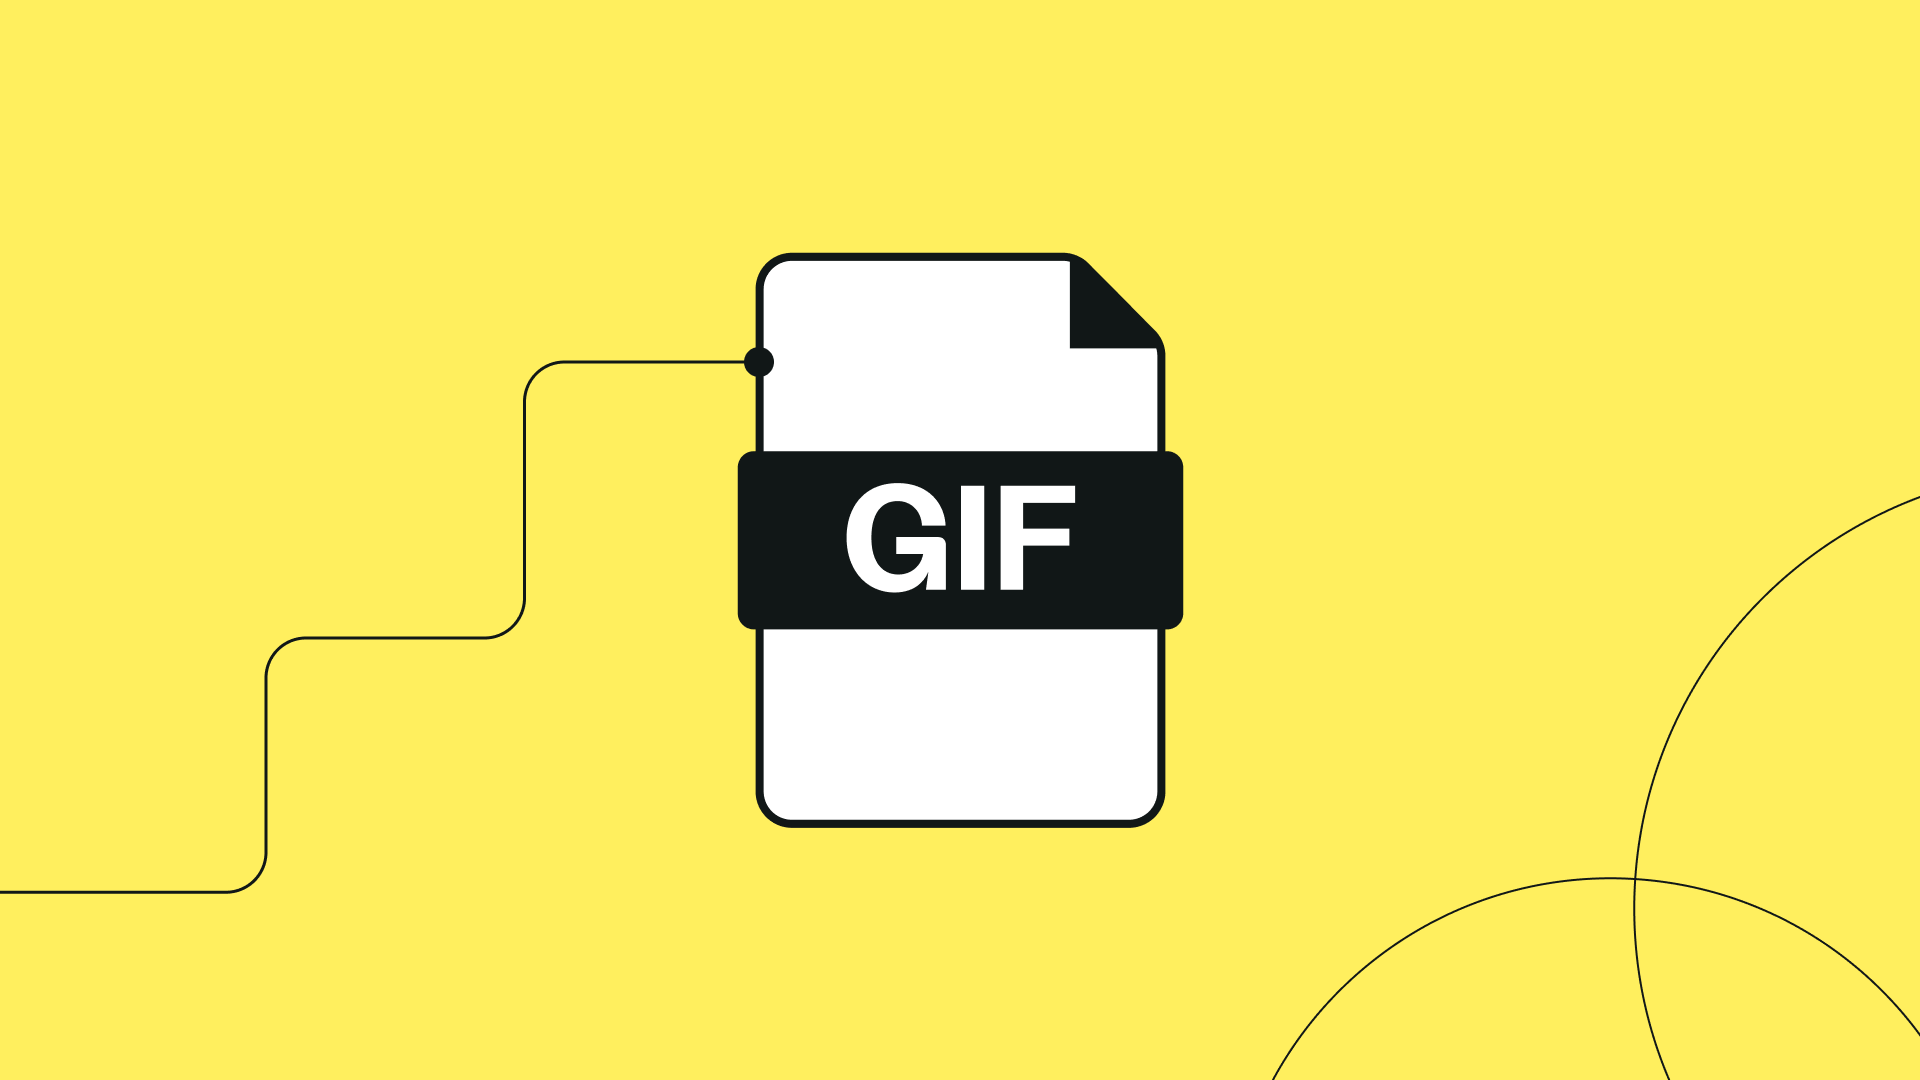 How to make a GIF